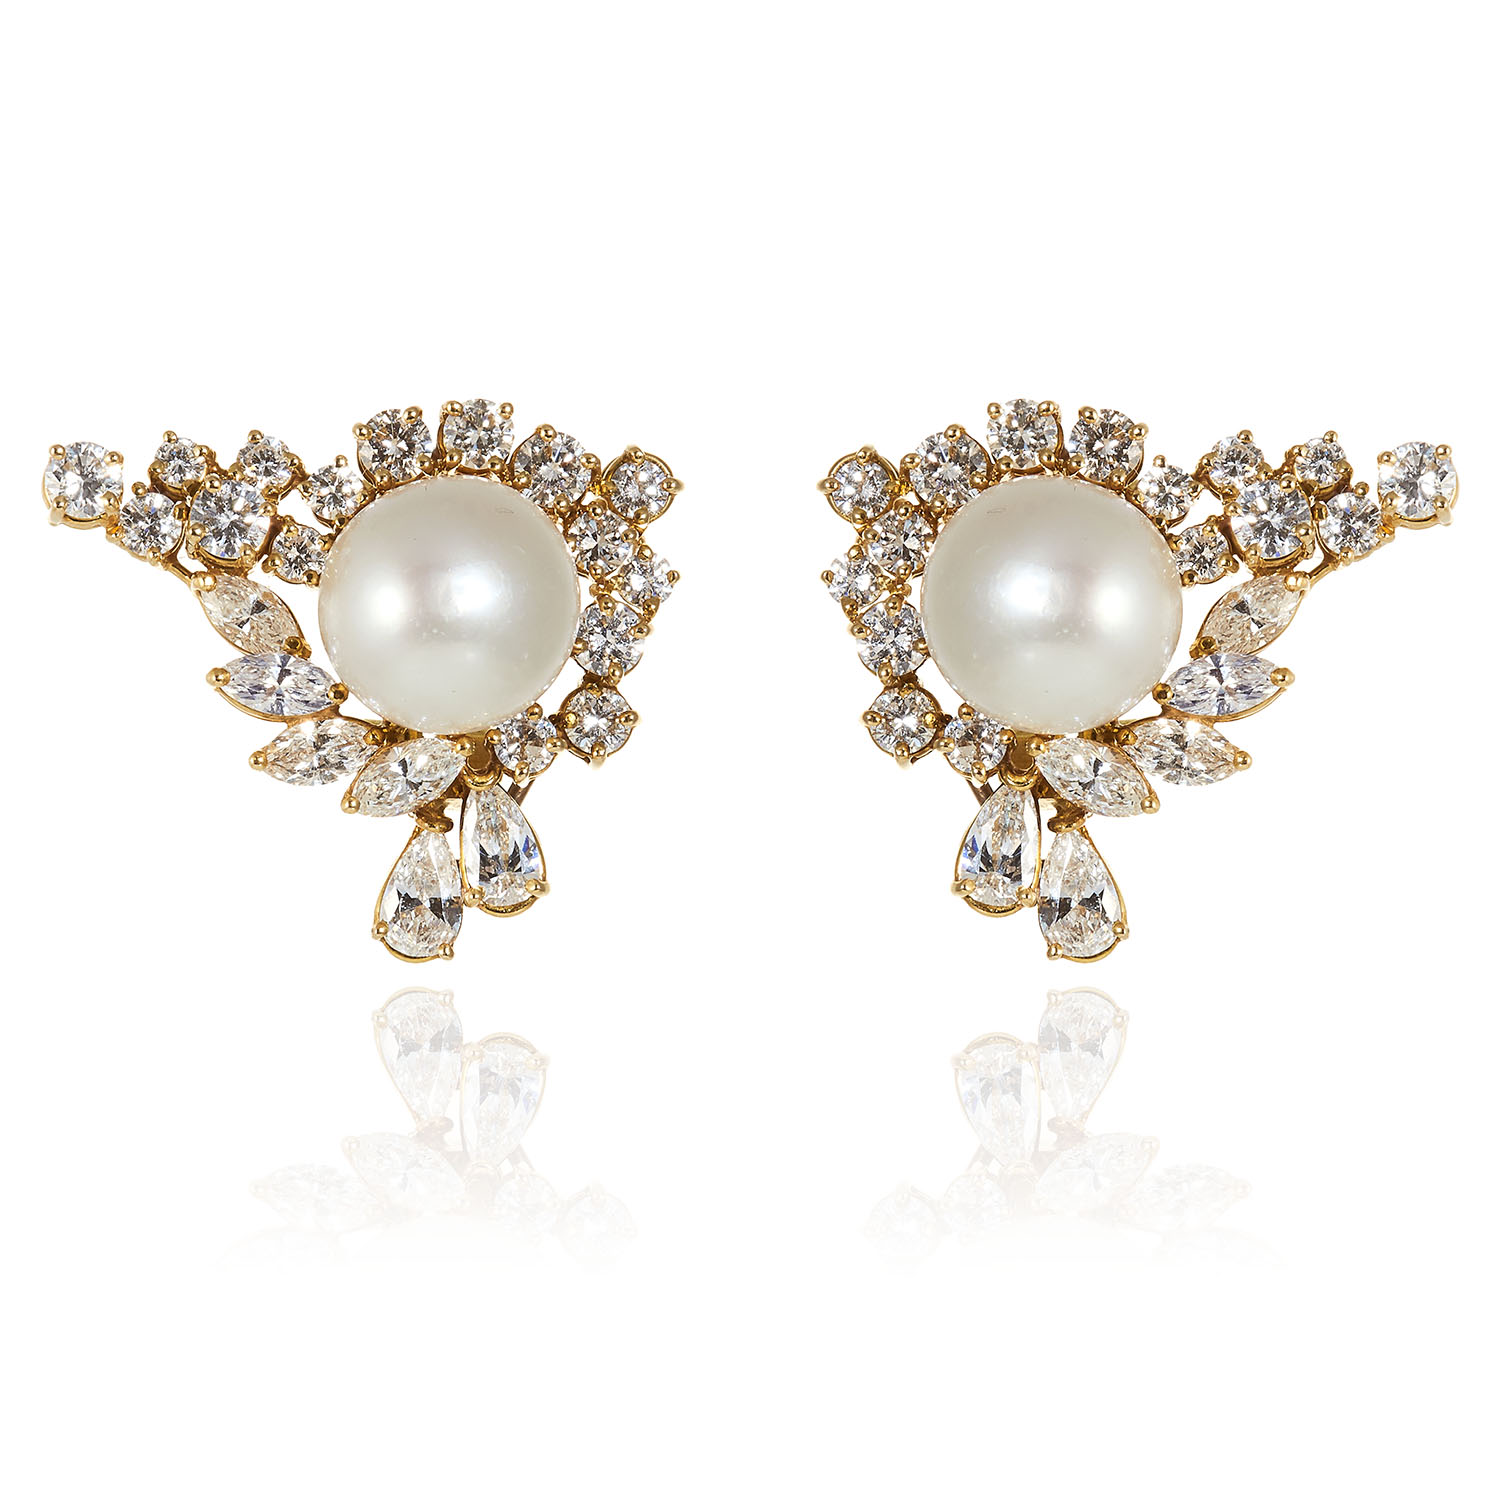 A PAIR OF VINTAGE PEARL AND DIAMOND EARRINGS in 18ct yellow gold, each comprising of central pearl